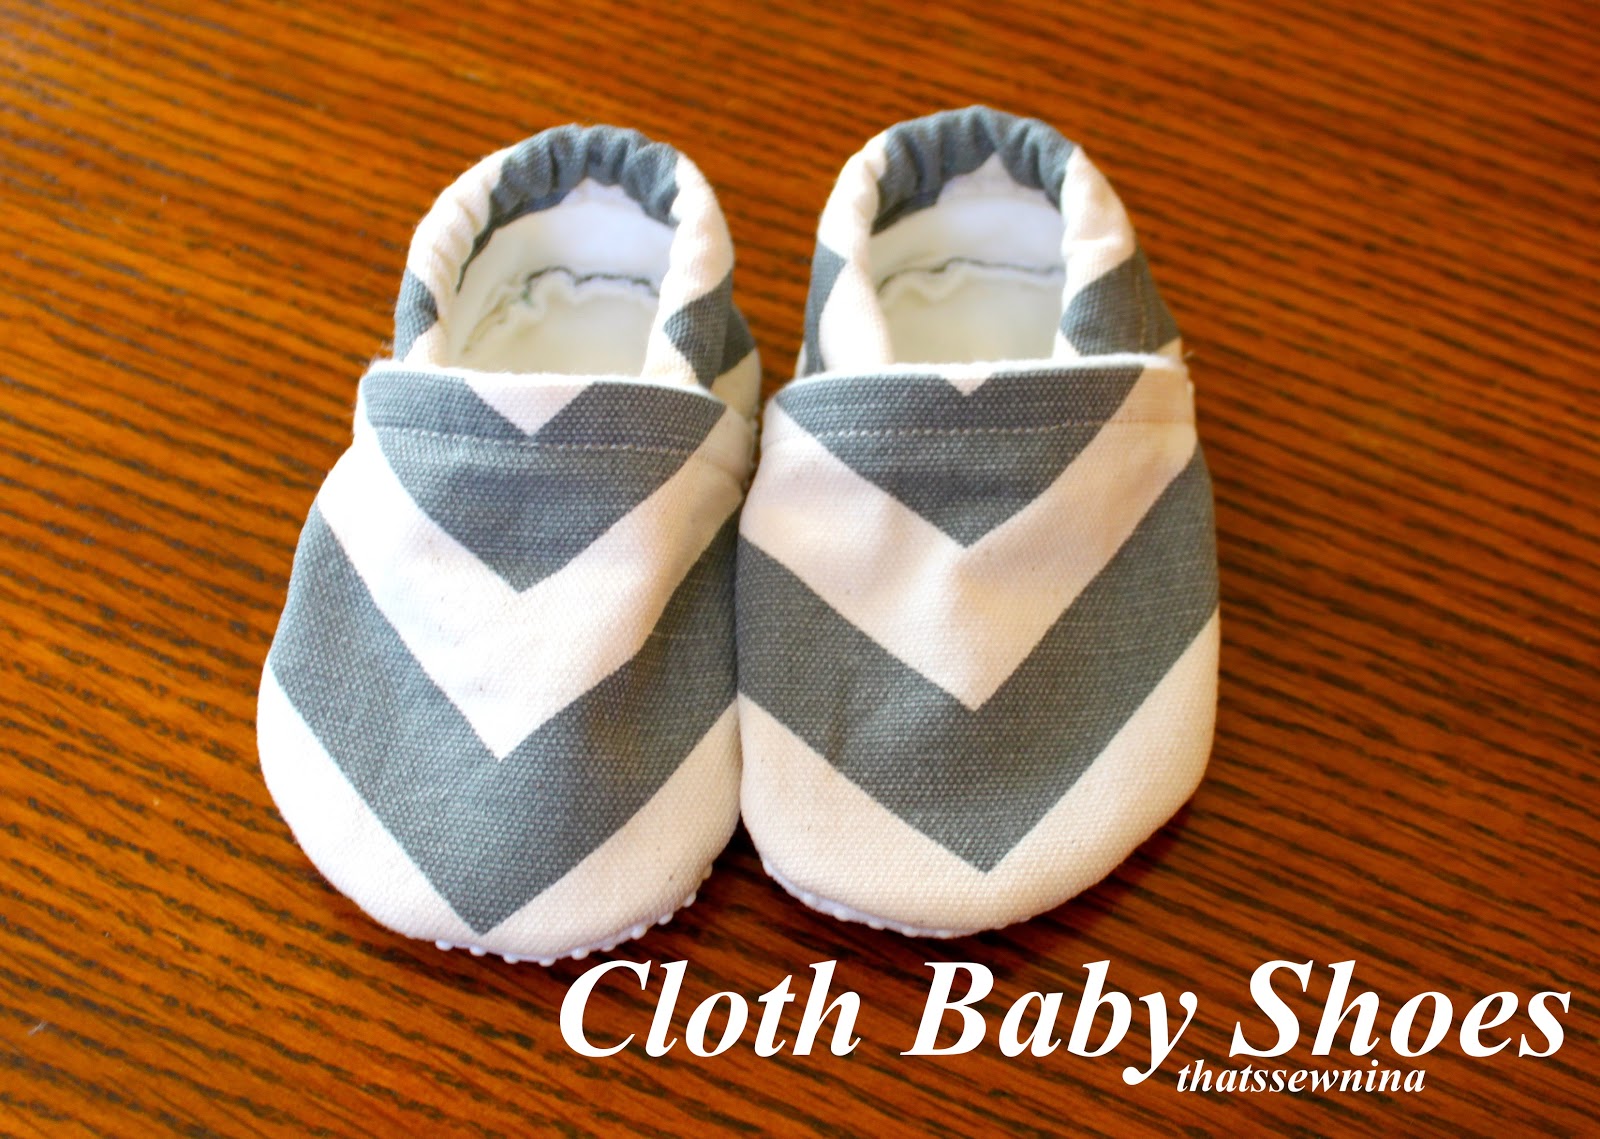 thatssewnina: My favorite DIY baby gift (part 3): Cloth Baby Shoes